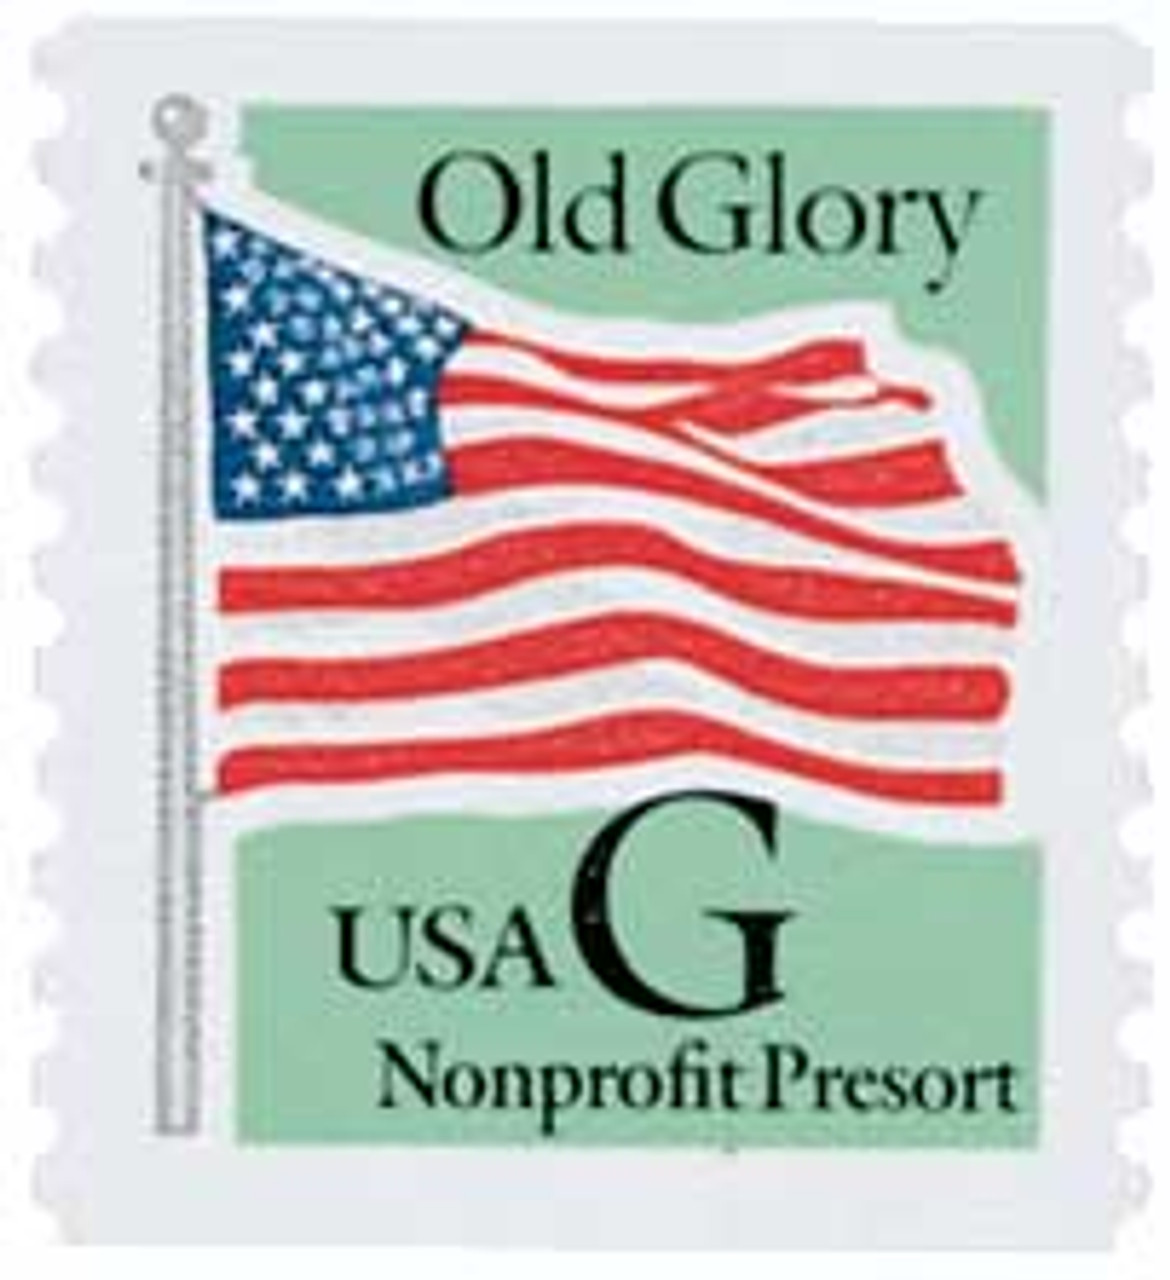 1 stamp : Red Flag Old Glory USA G Postage Stamps USPS US Postal Mail lette  NEW